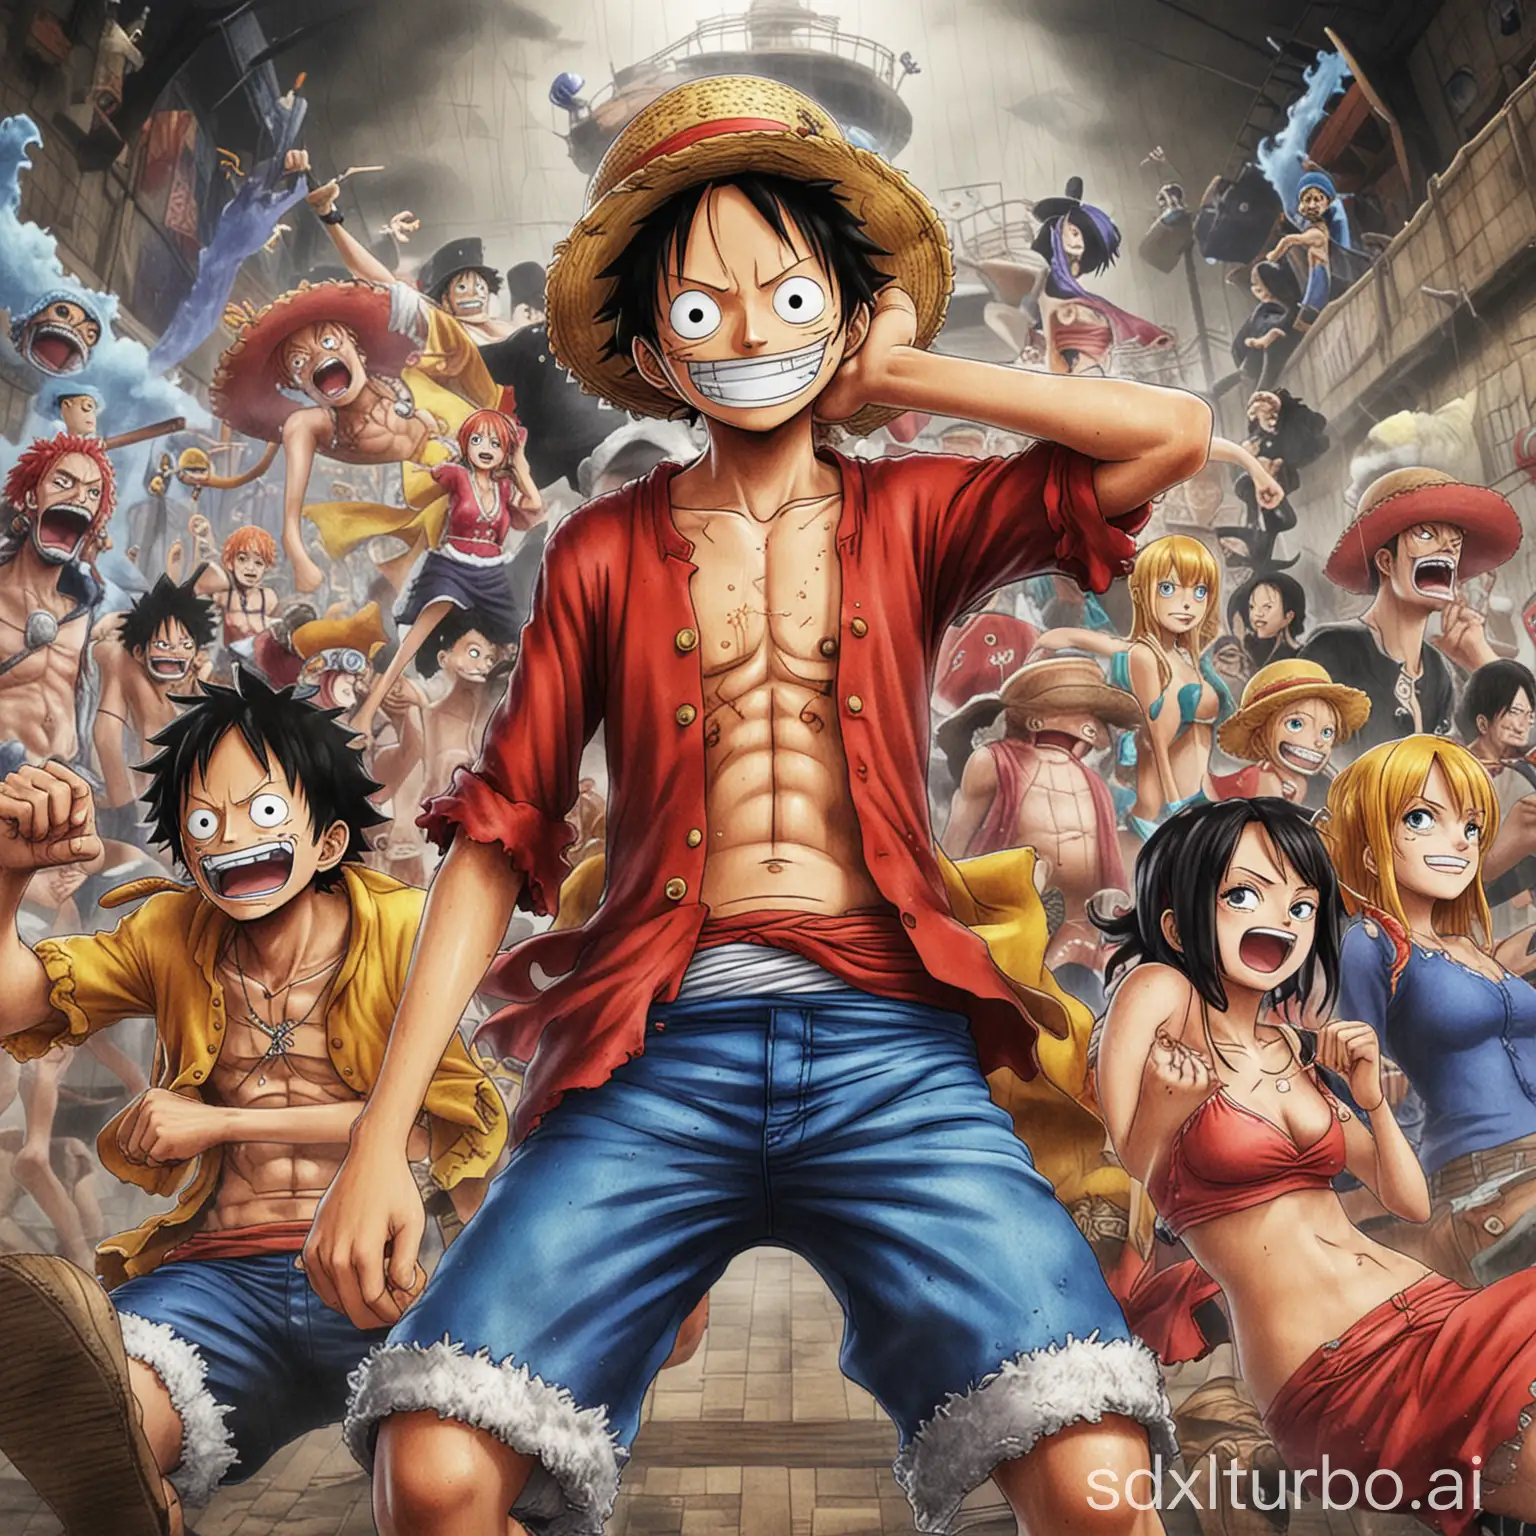 Colorful-Adventures-One-Piece-Animation-Artwork